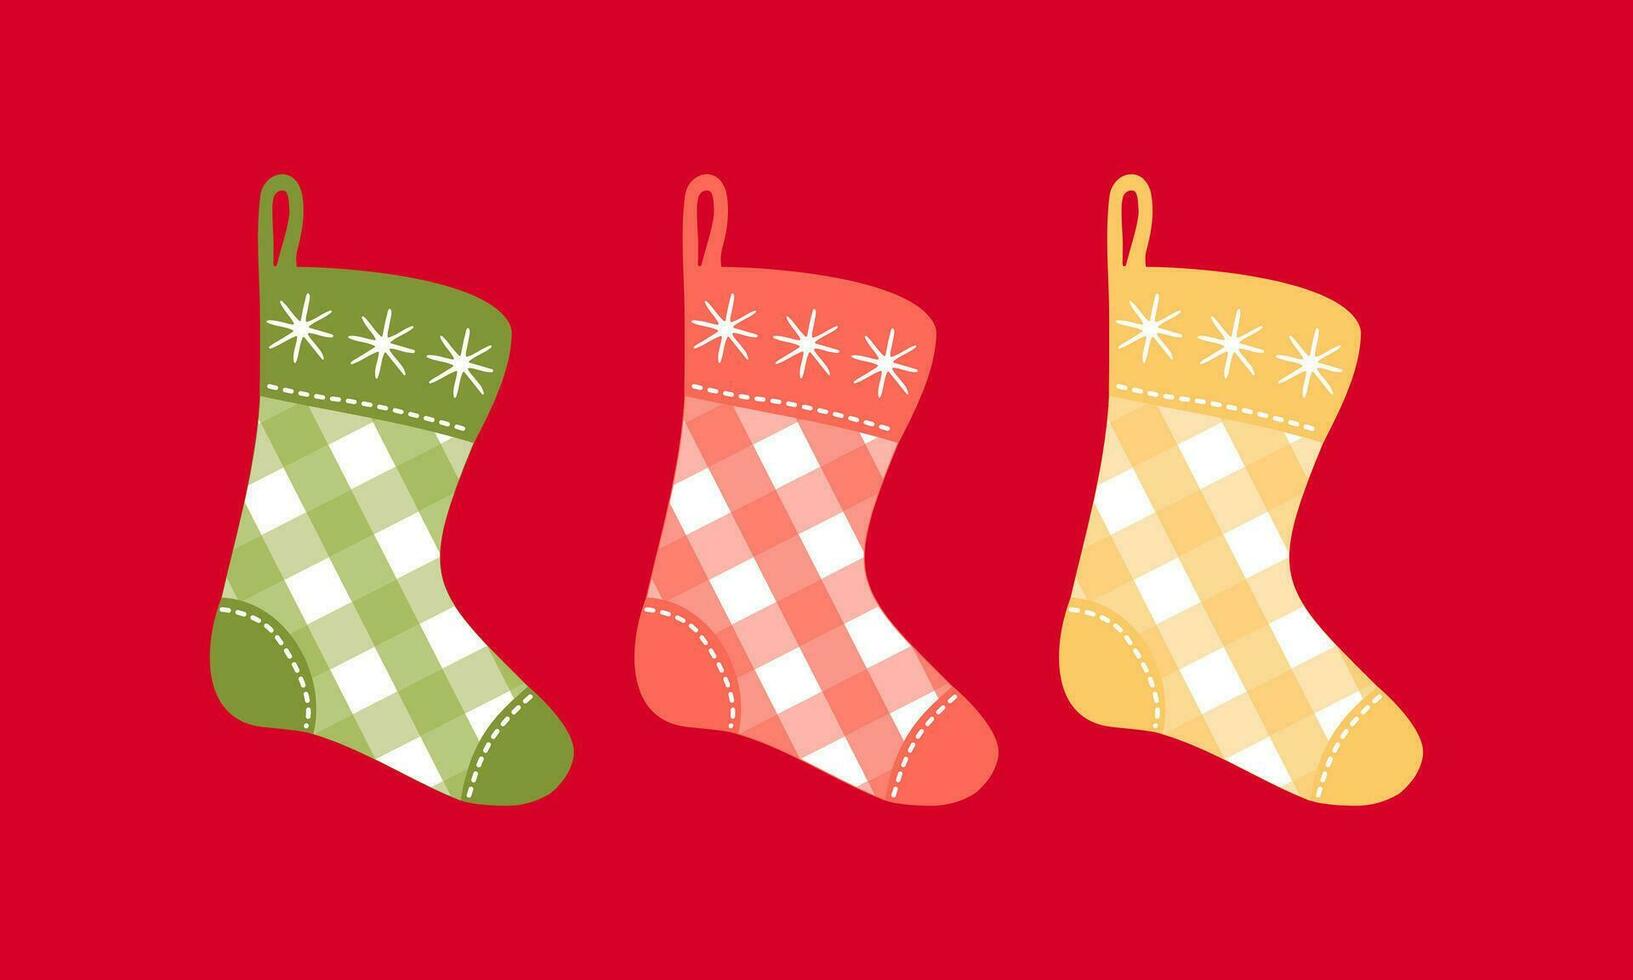 Clipart set with Christmas plaid stockings on isolated red background. Holiday design for Christmas home decor, holiday greetings, Christmas and New Year celebration. vector